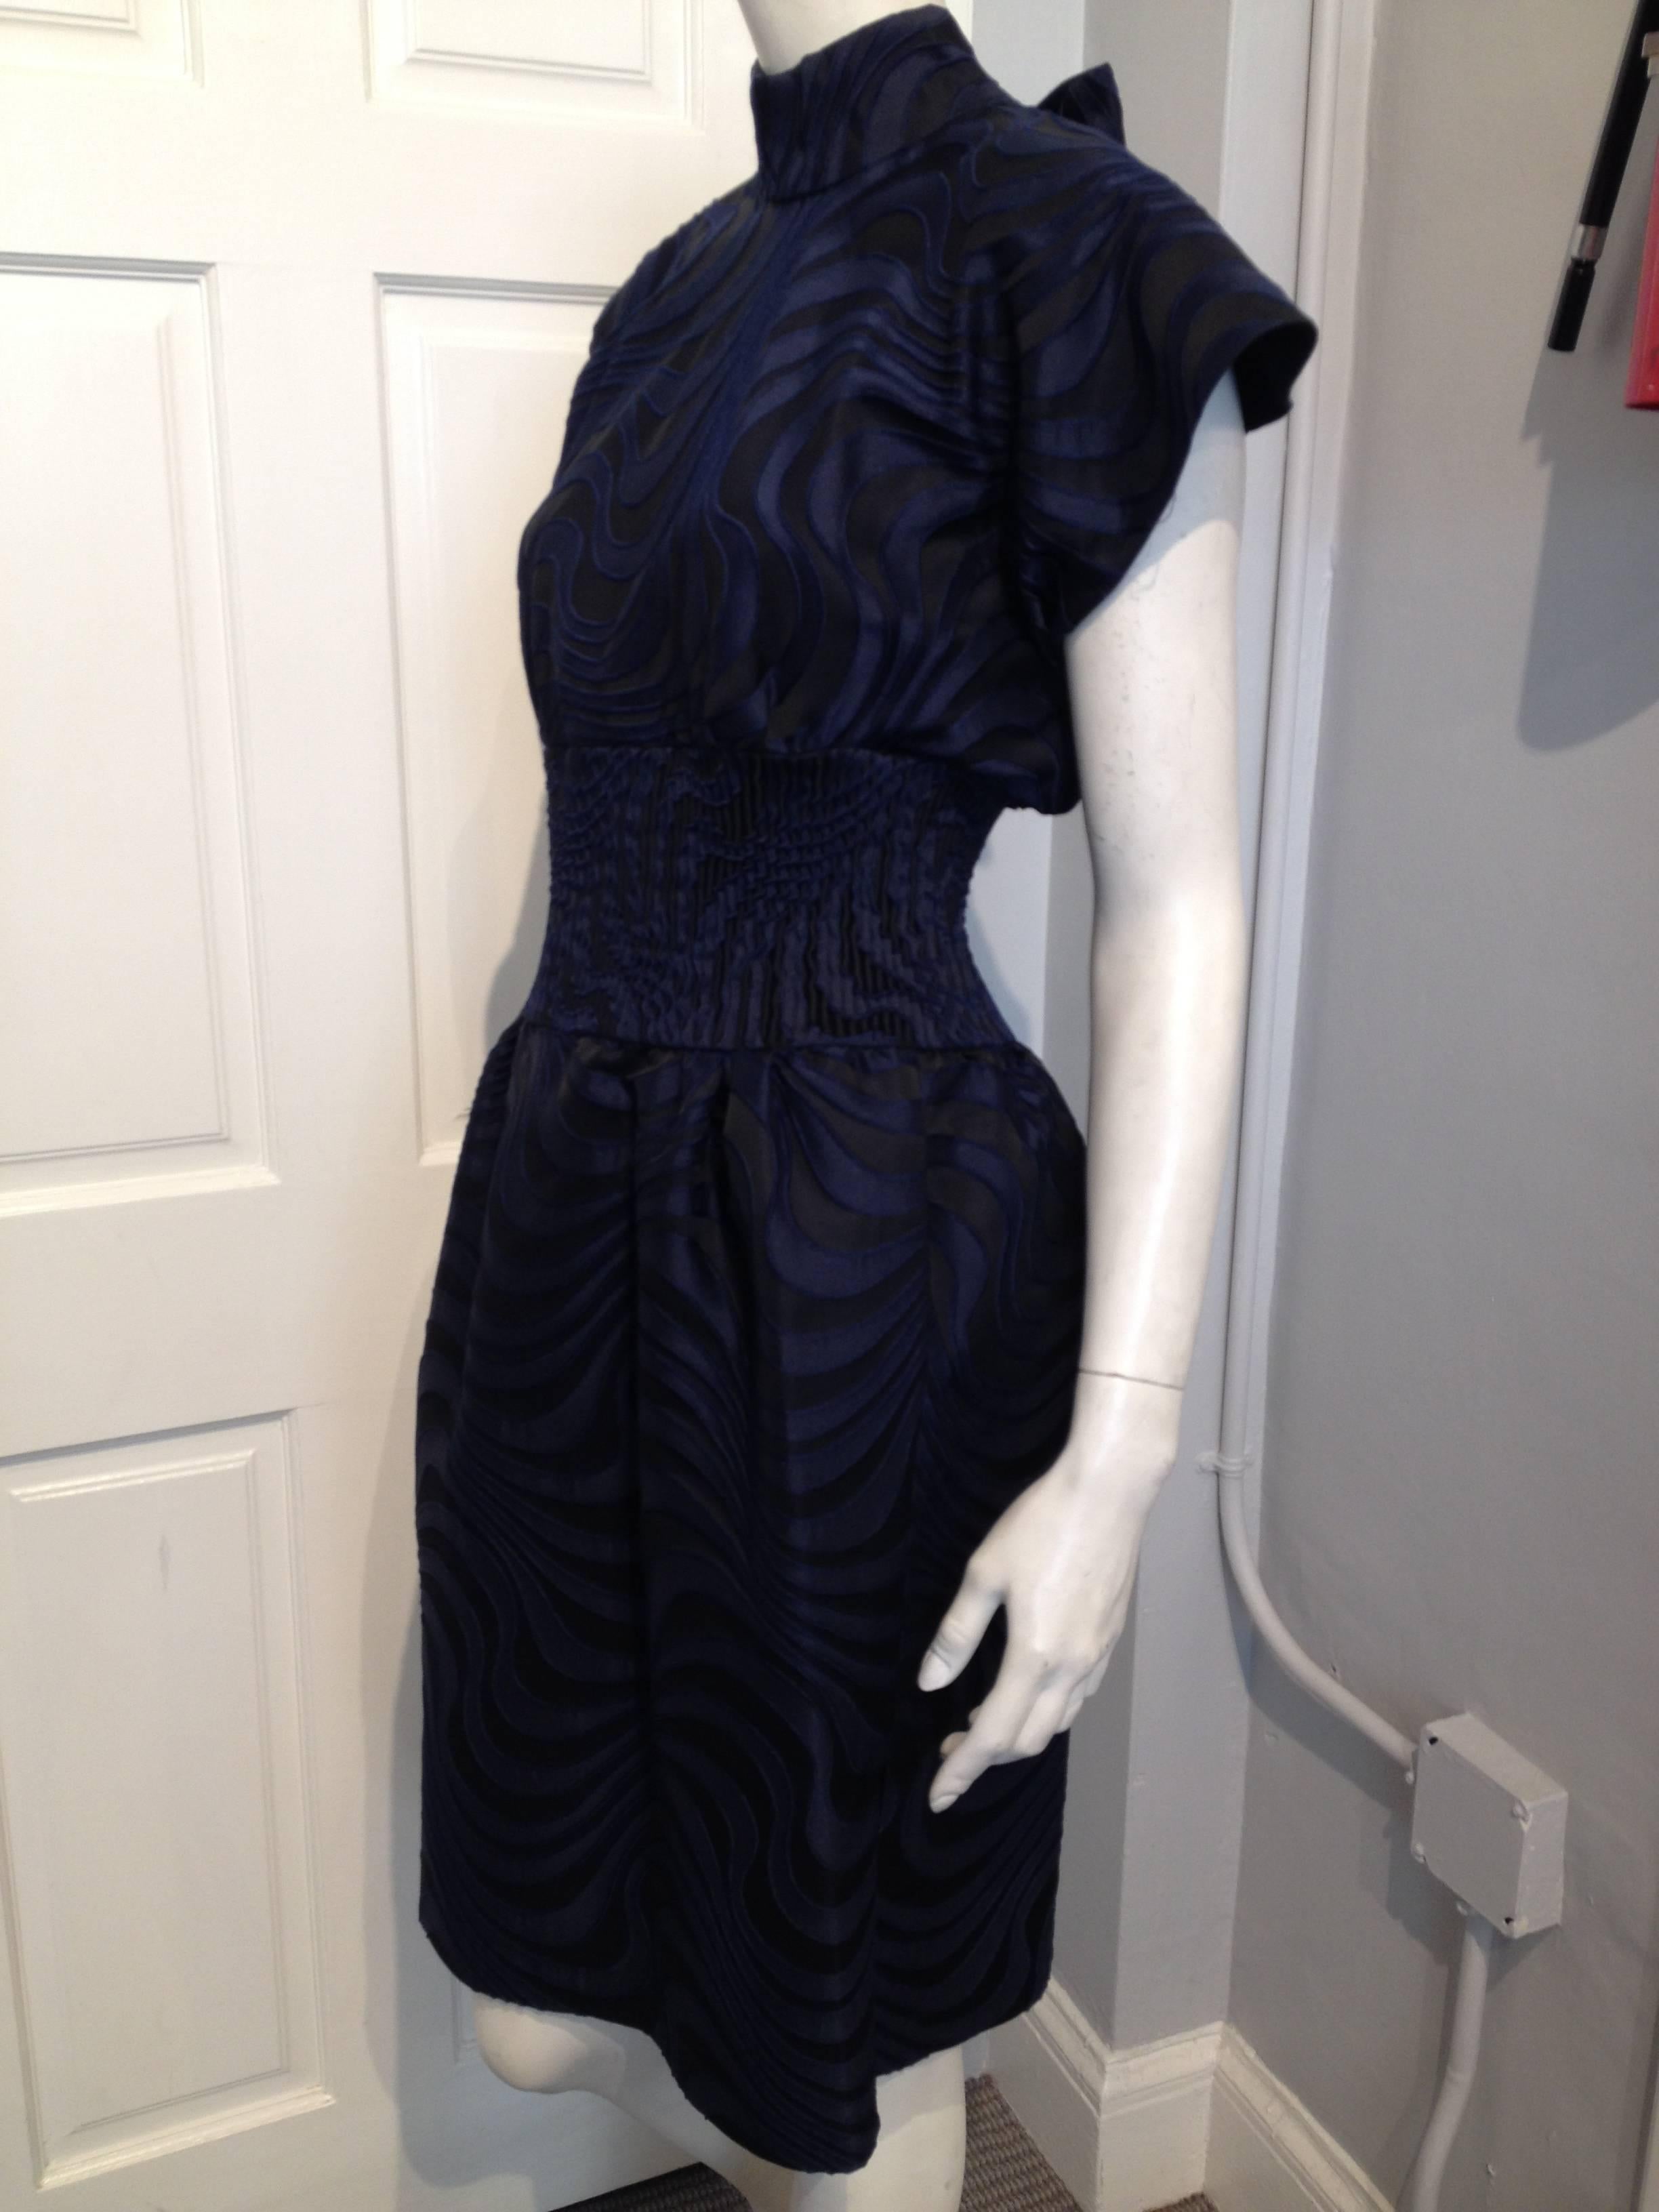 A sculptural and unique cocktail dress by Vionnet. Black and navy swirled brocade fabric. Wide cape-like flared shoulders, a ruched waistband, flared skirt, with a hidden zipper running down the back.